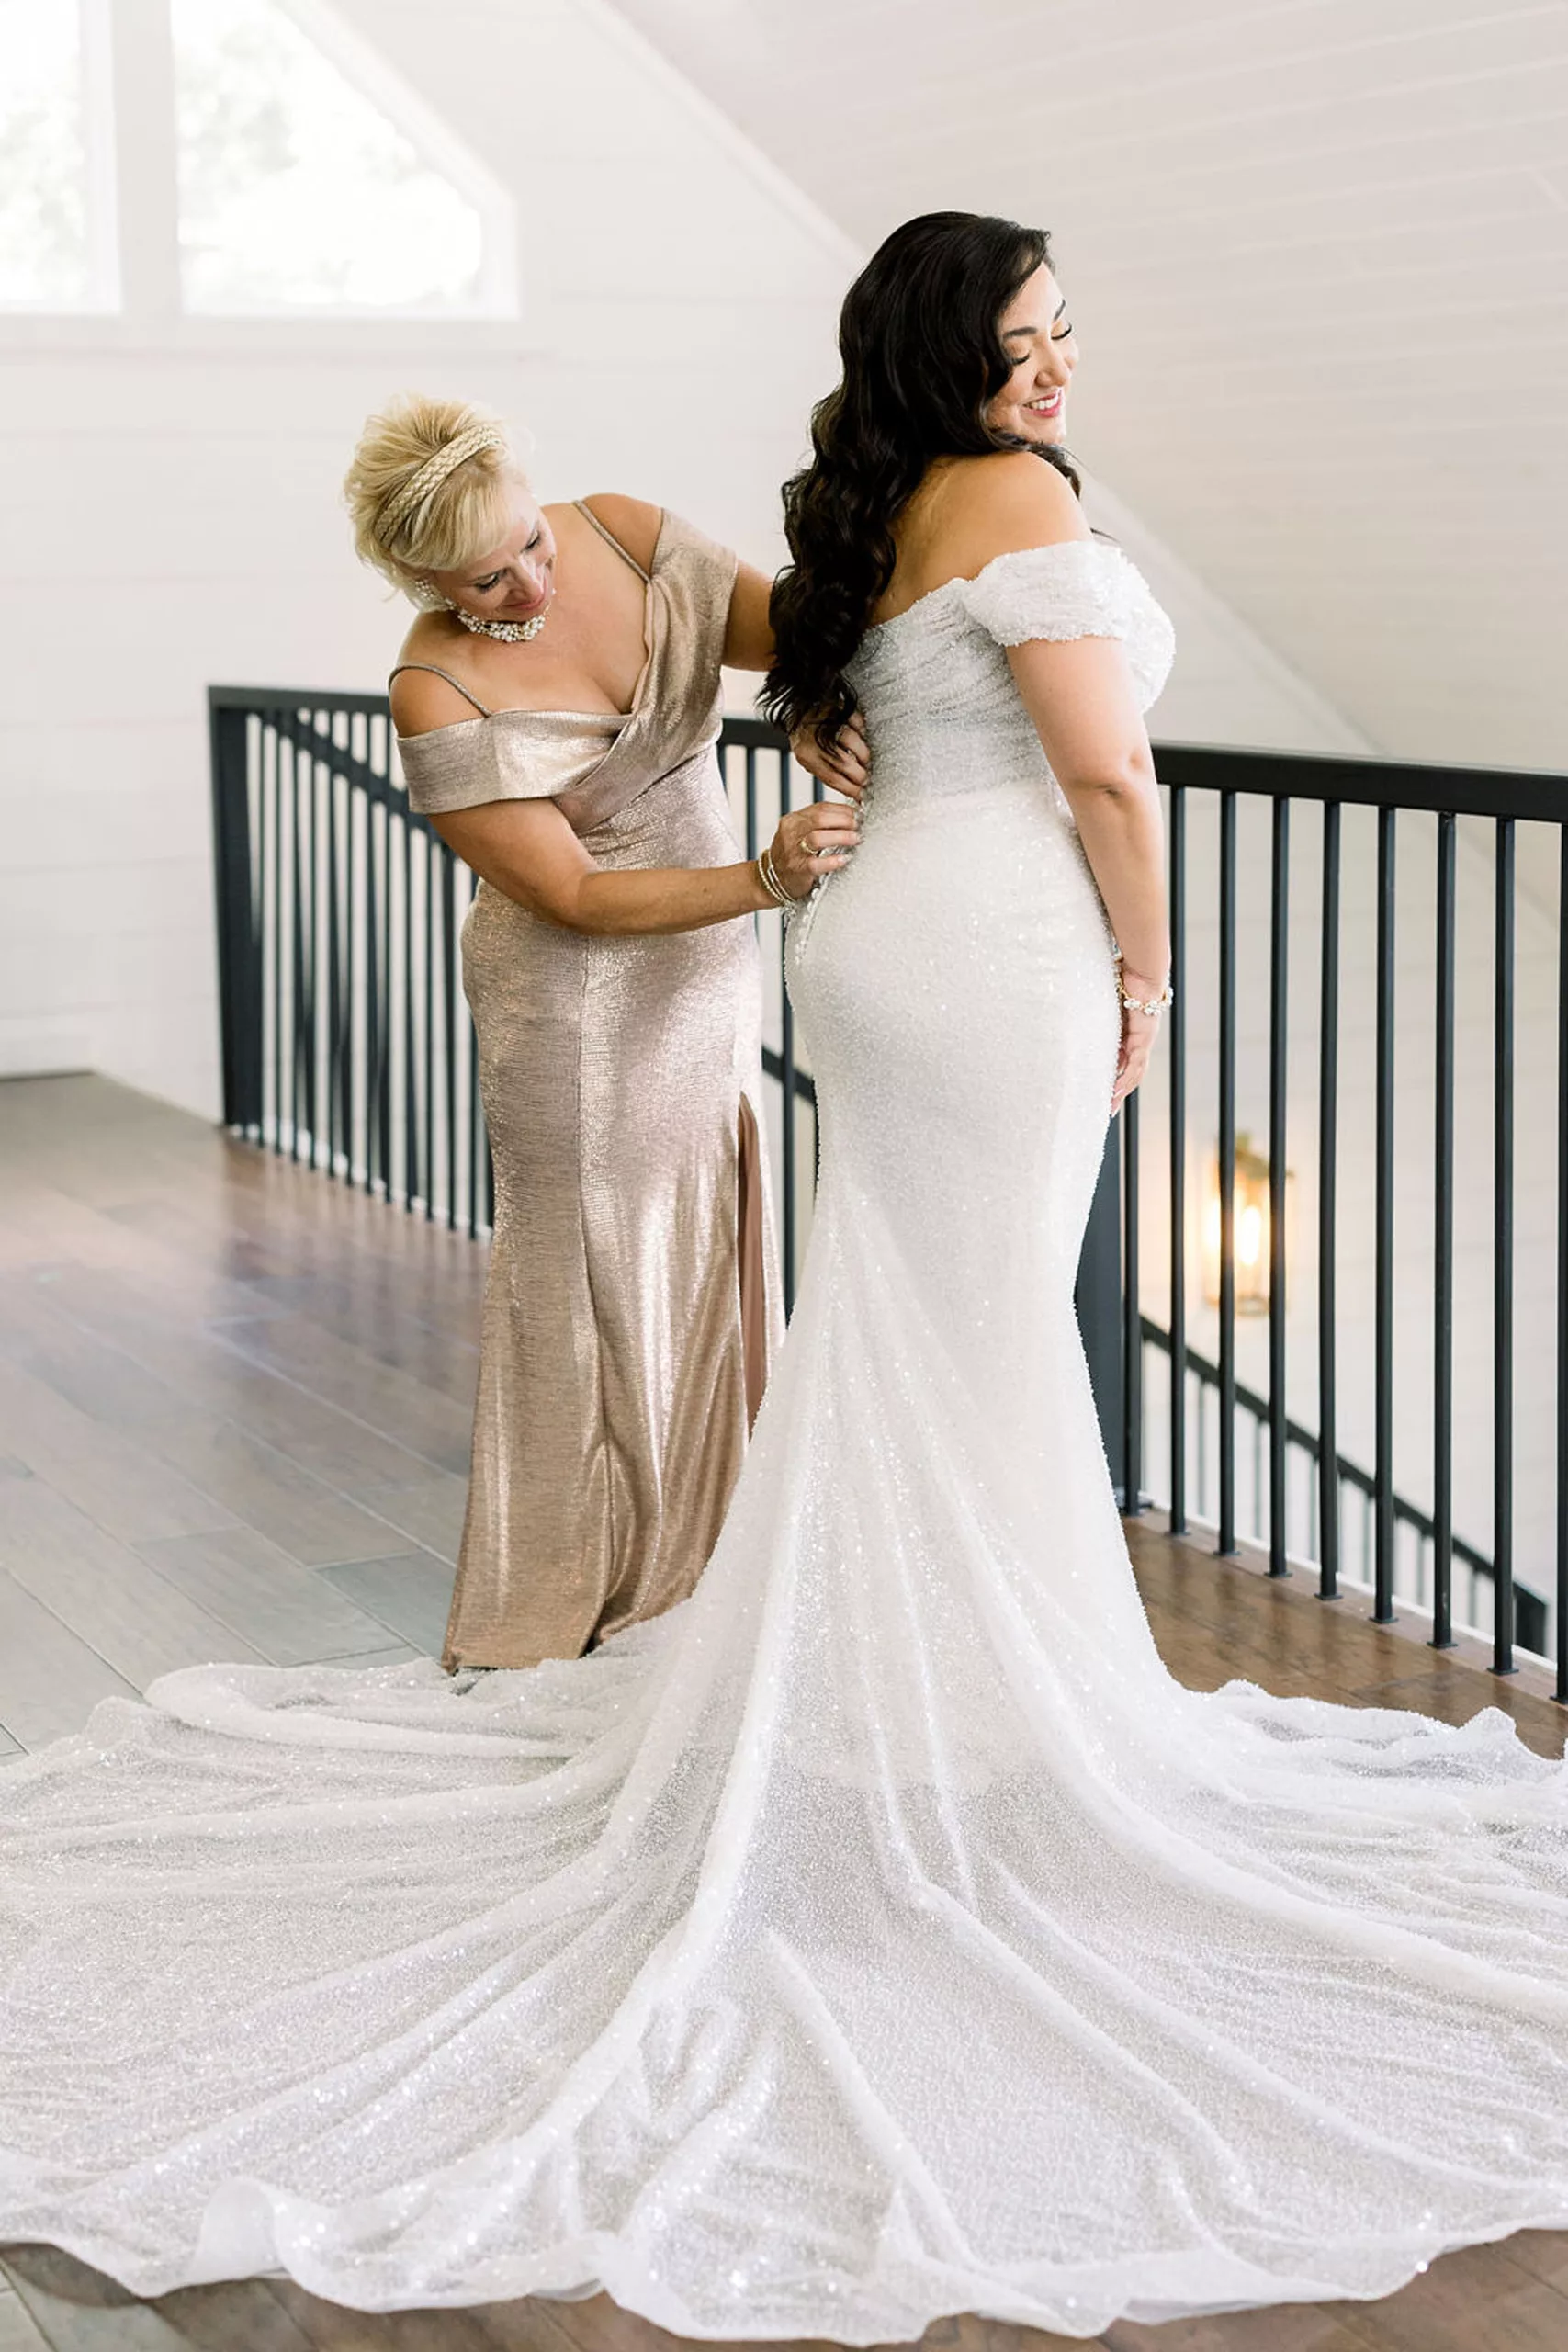 A bride stands on a balcony with her dress spread as her mom helps button the back